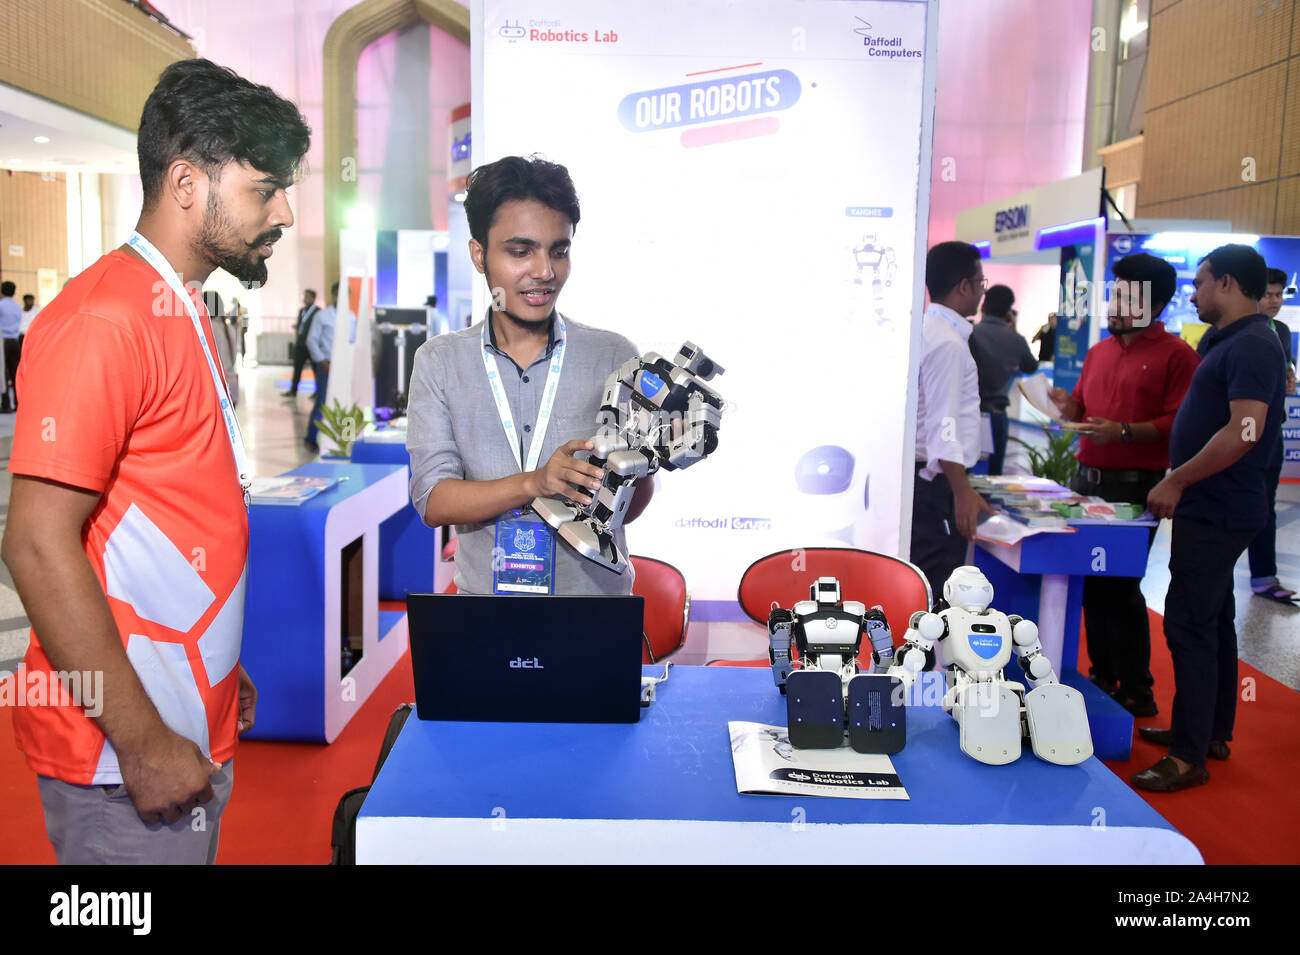 191015) -- DHAKA, Oct. 15, 2019 (Xinhua) -- A man shows a digital device at  a stall during the "Digital Device and Innovation Expo 2019" in Dhaka,  Bangladesh, on Oct. 14, 2019.